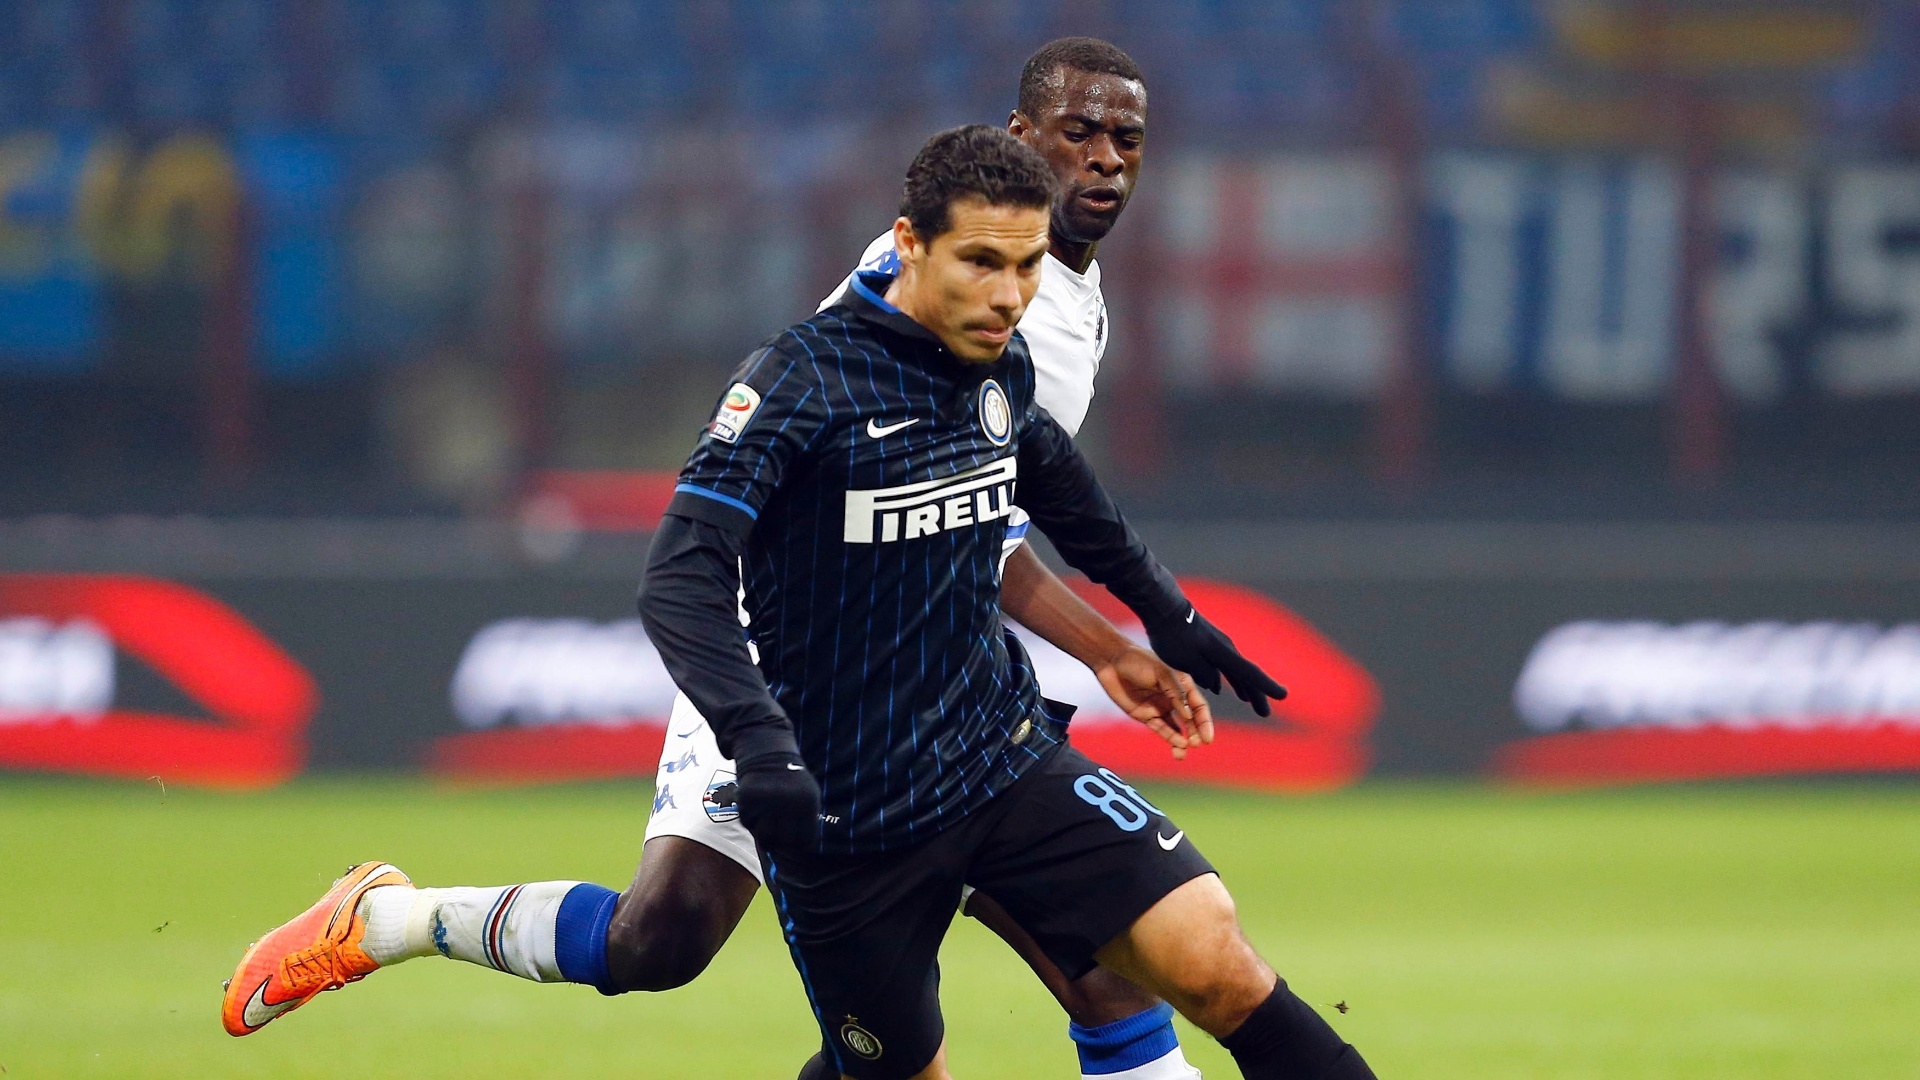 Hernanes: “Now comes the moment of truth”